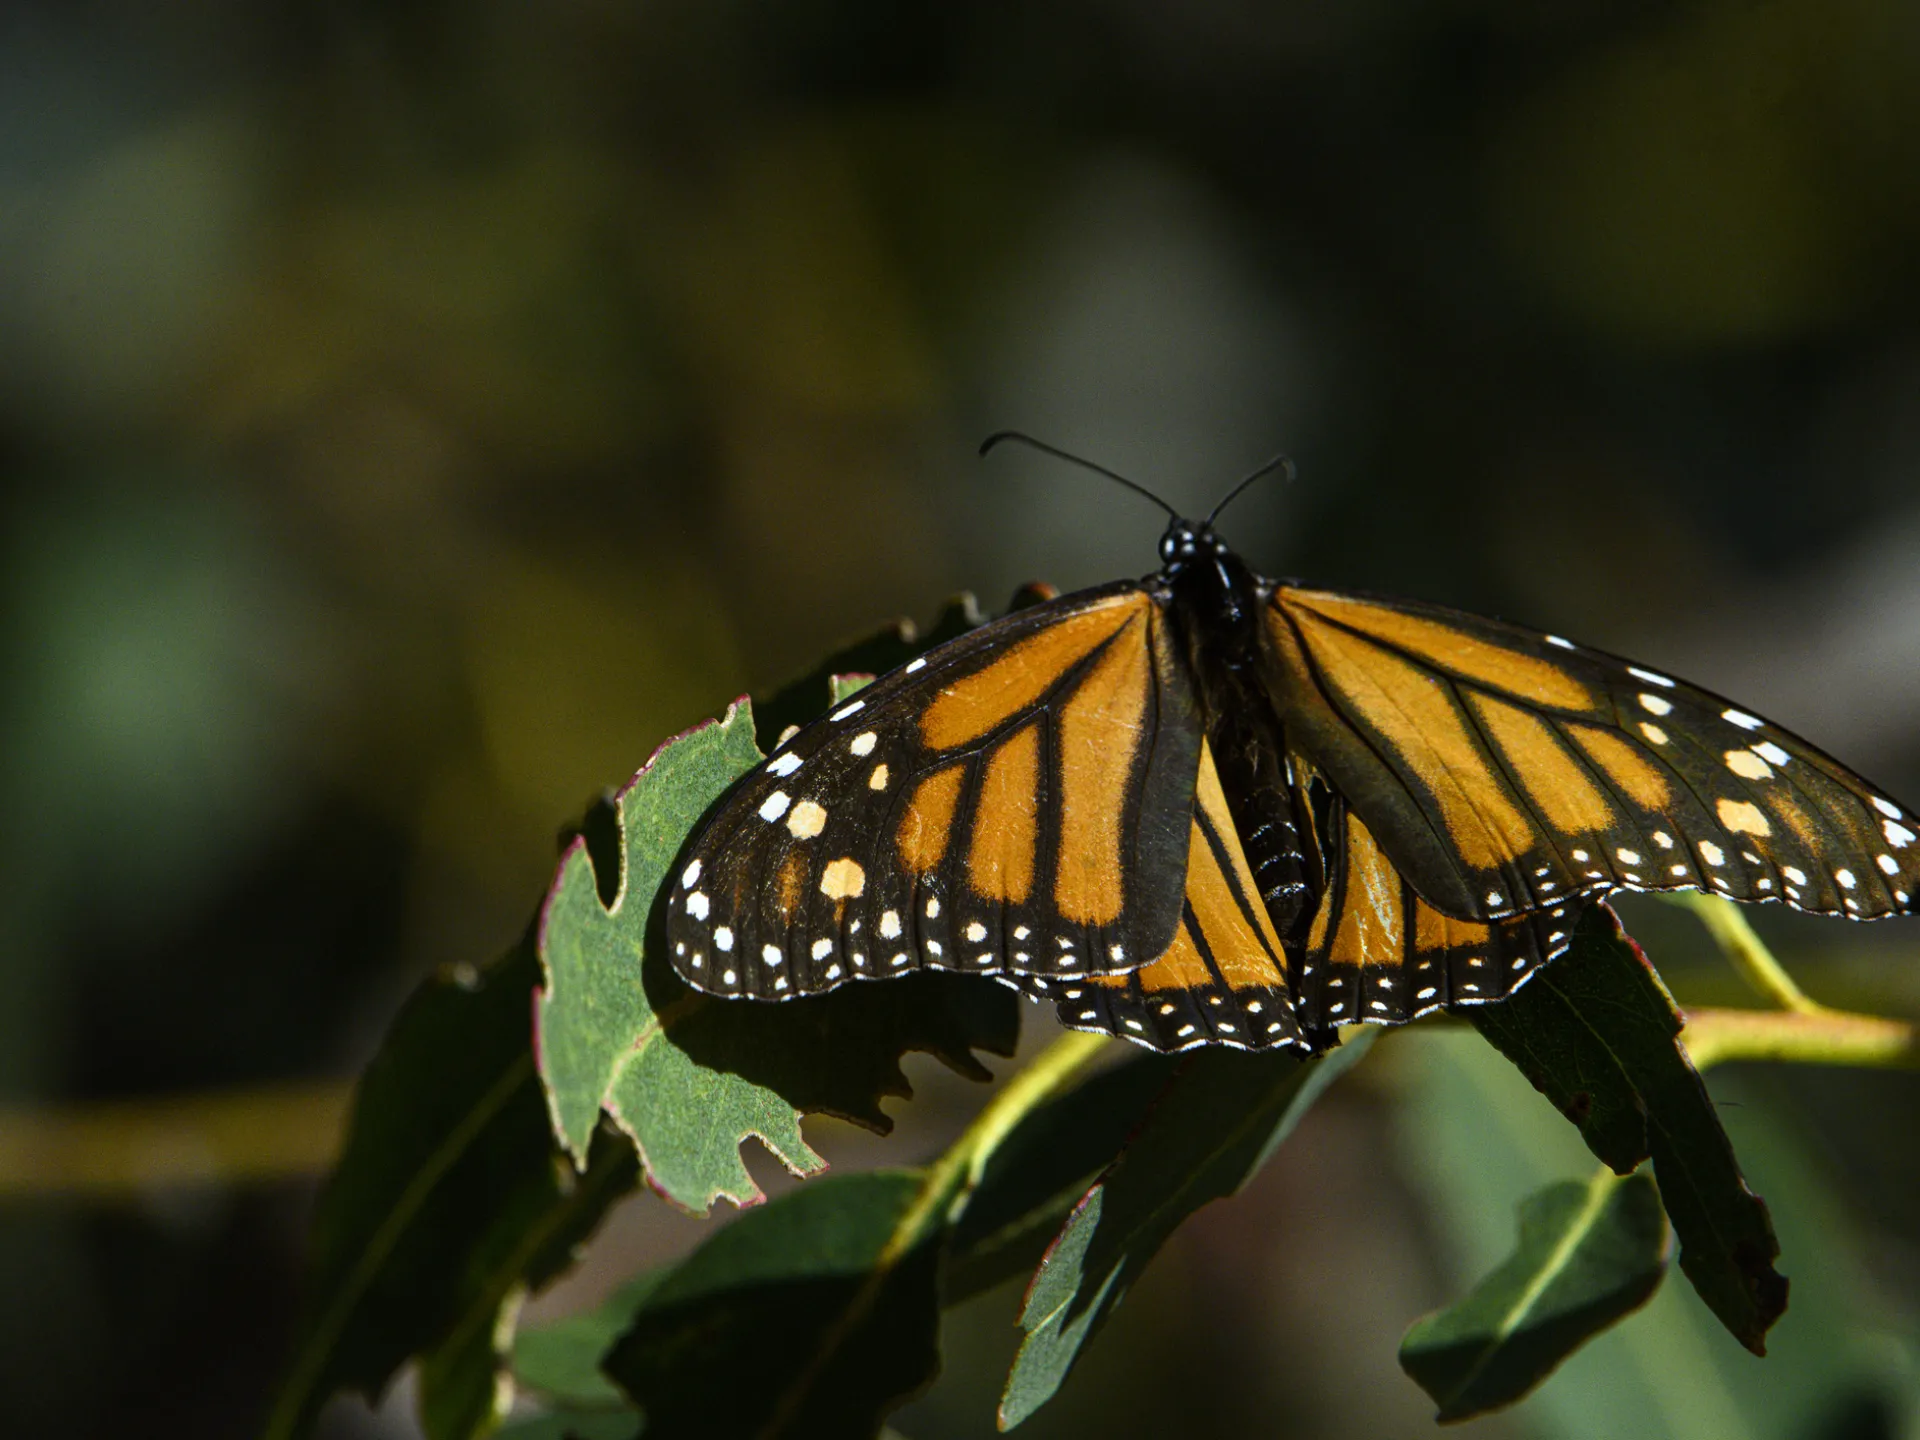 Annual migration of monarch butterflies in California shows sign